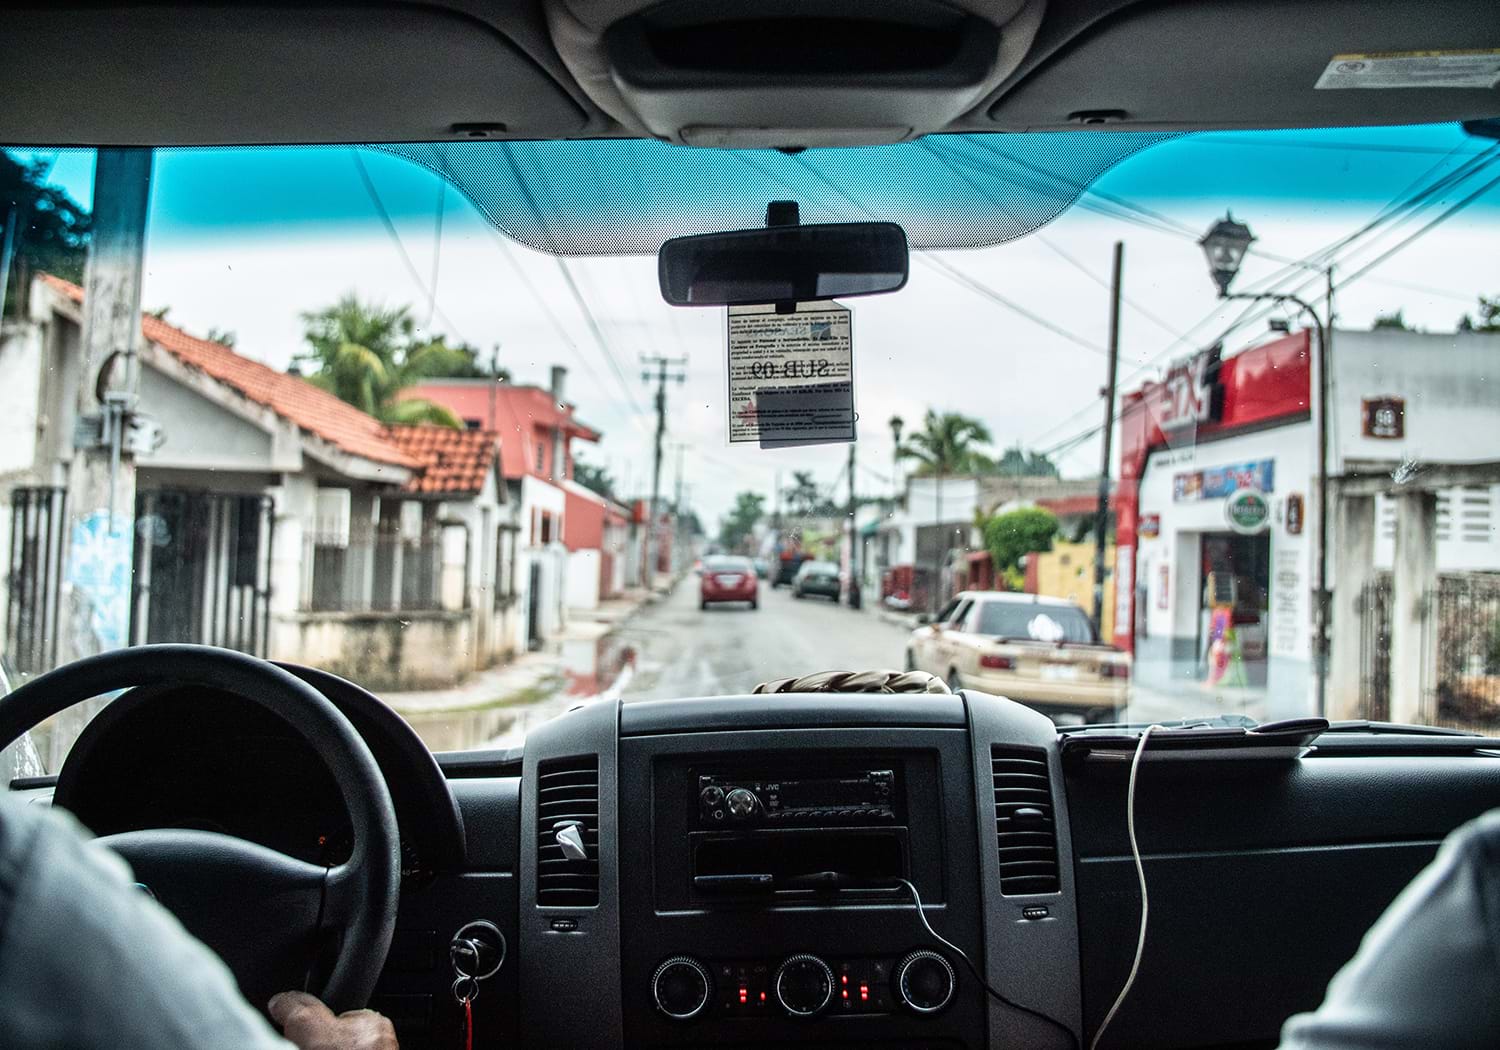 View through car windshield as it goes down street